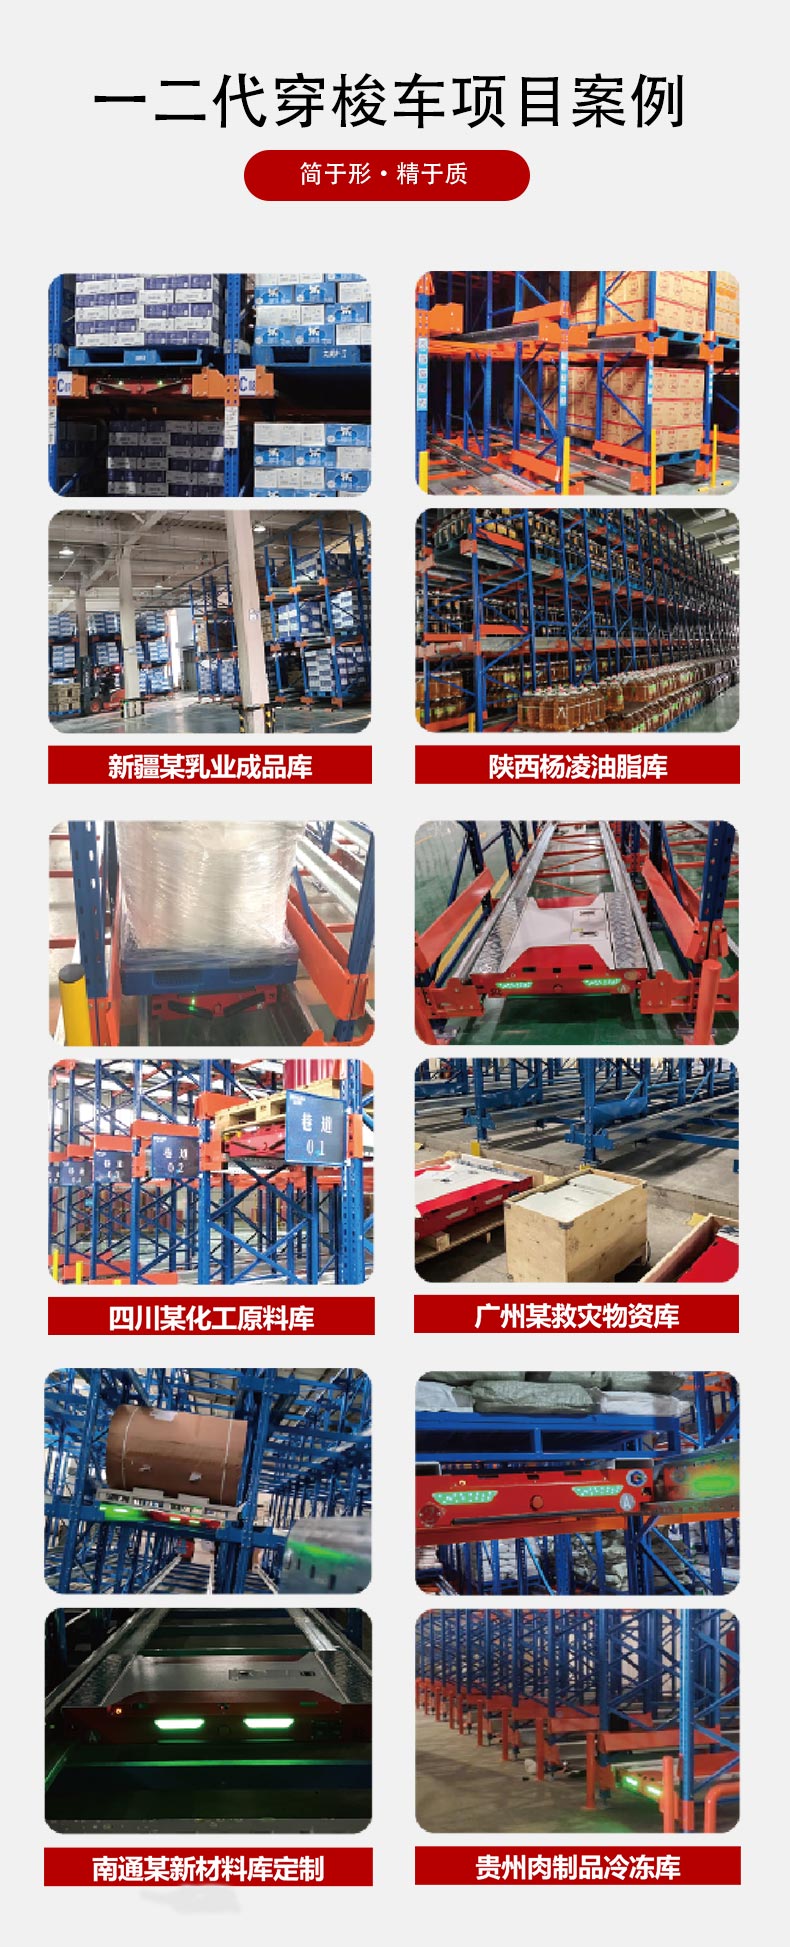 Two way shuttle vehicle, automated three-dimensional warehouse, warehousing equipment, and handling robot manufacturer independently developed